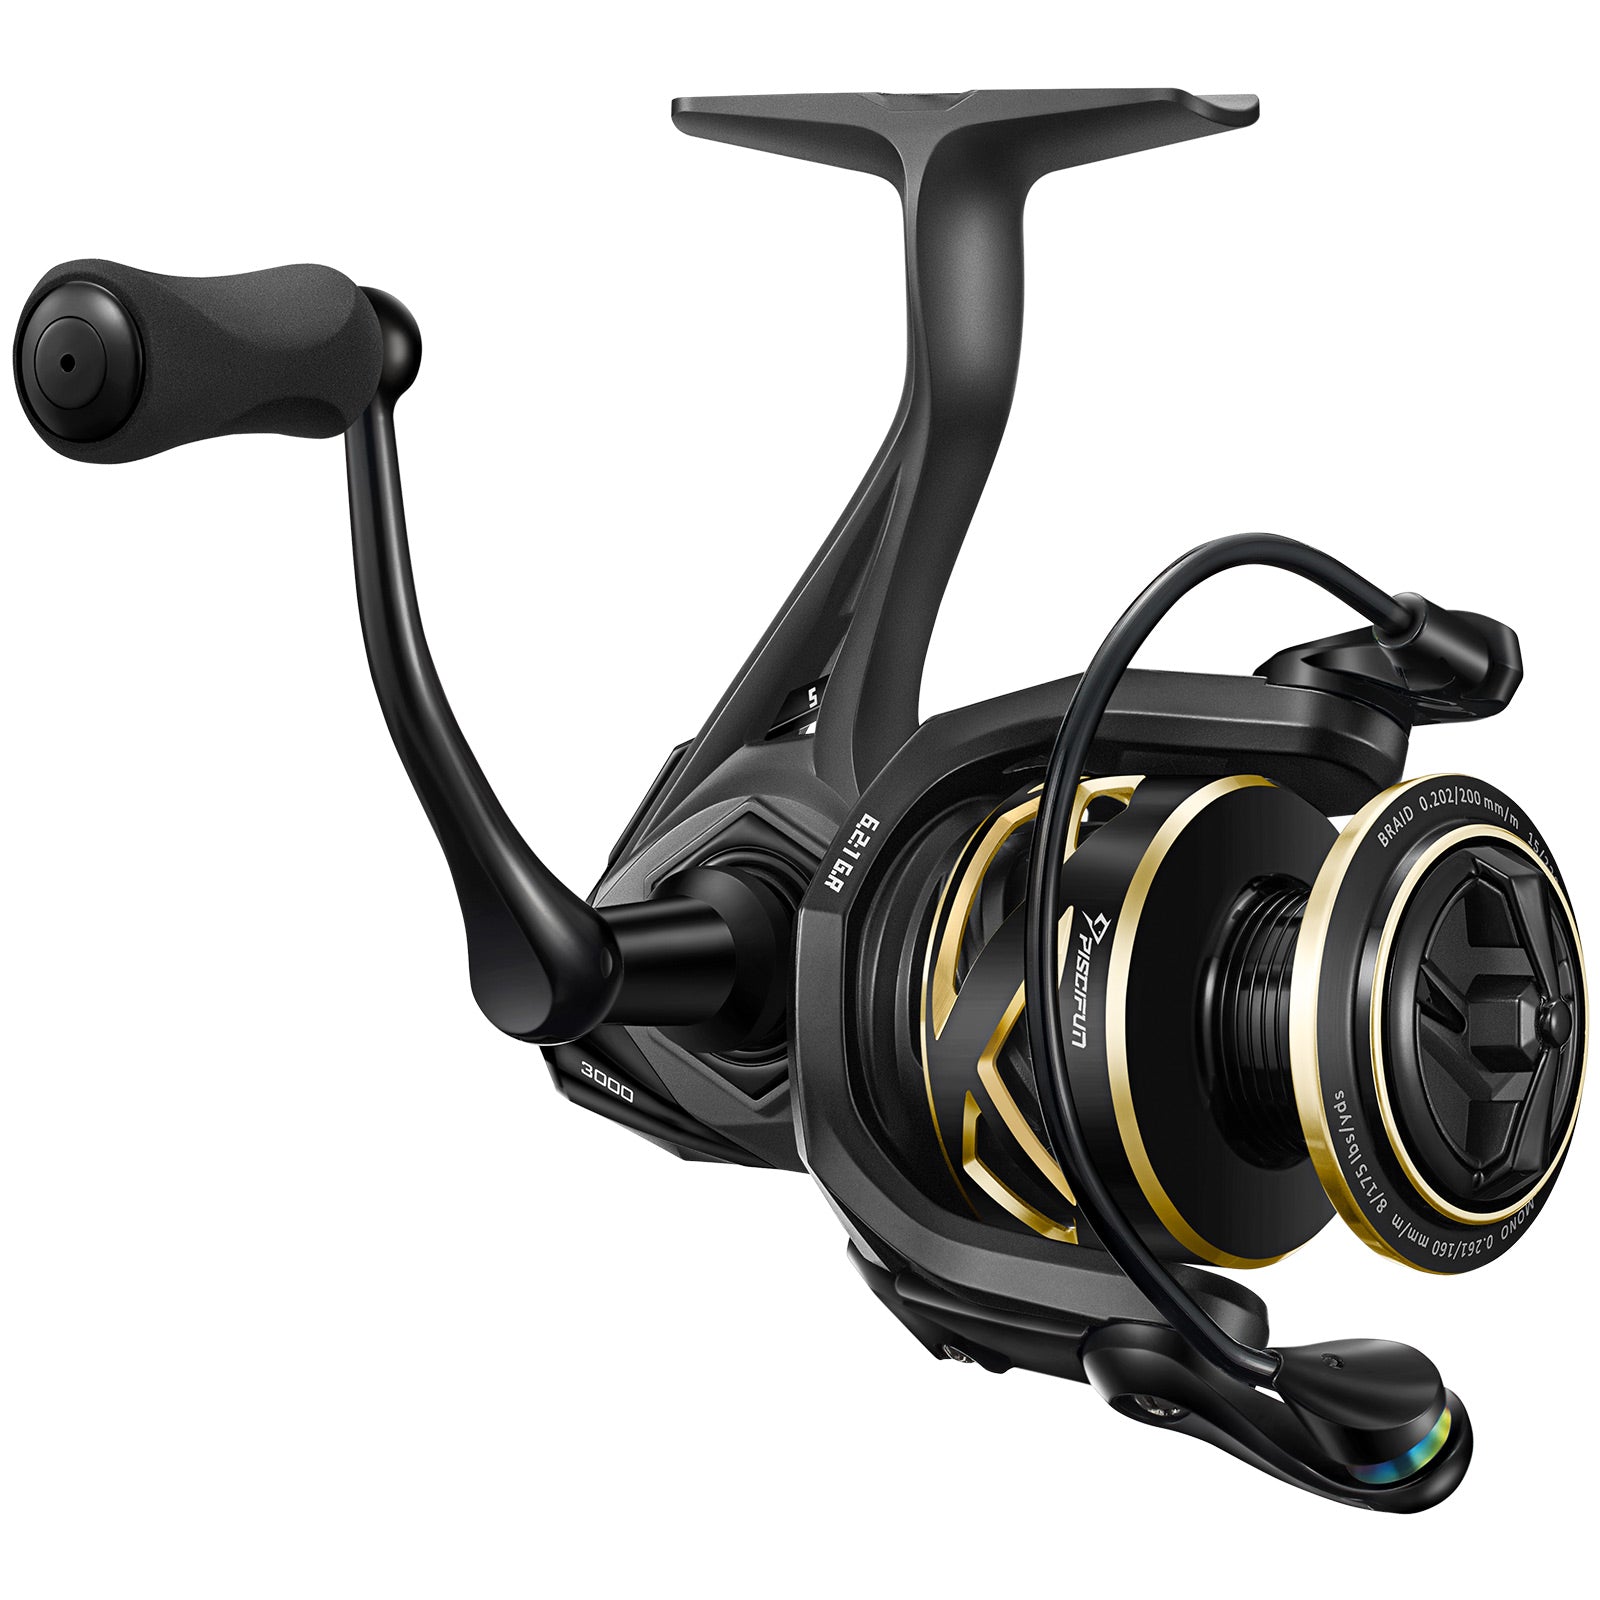 Piscifun® Auric Spinning Reels - Saltwater and Freshwater Spinning Fis, 3000-6.2:1